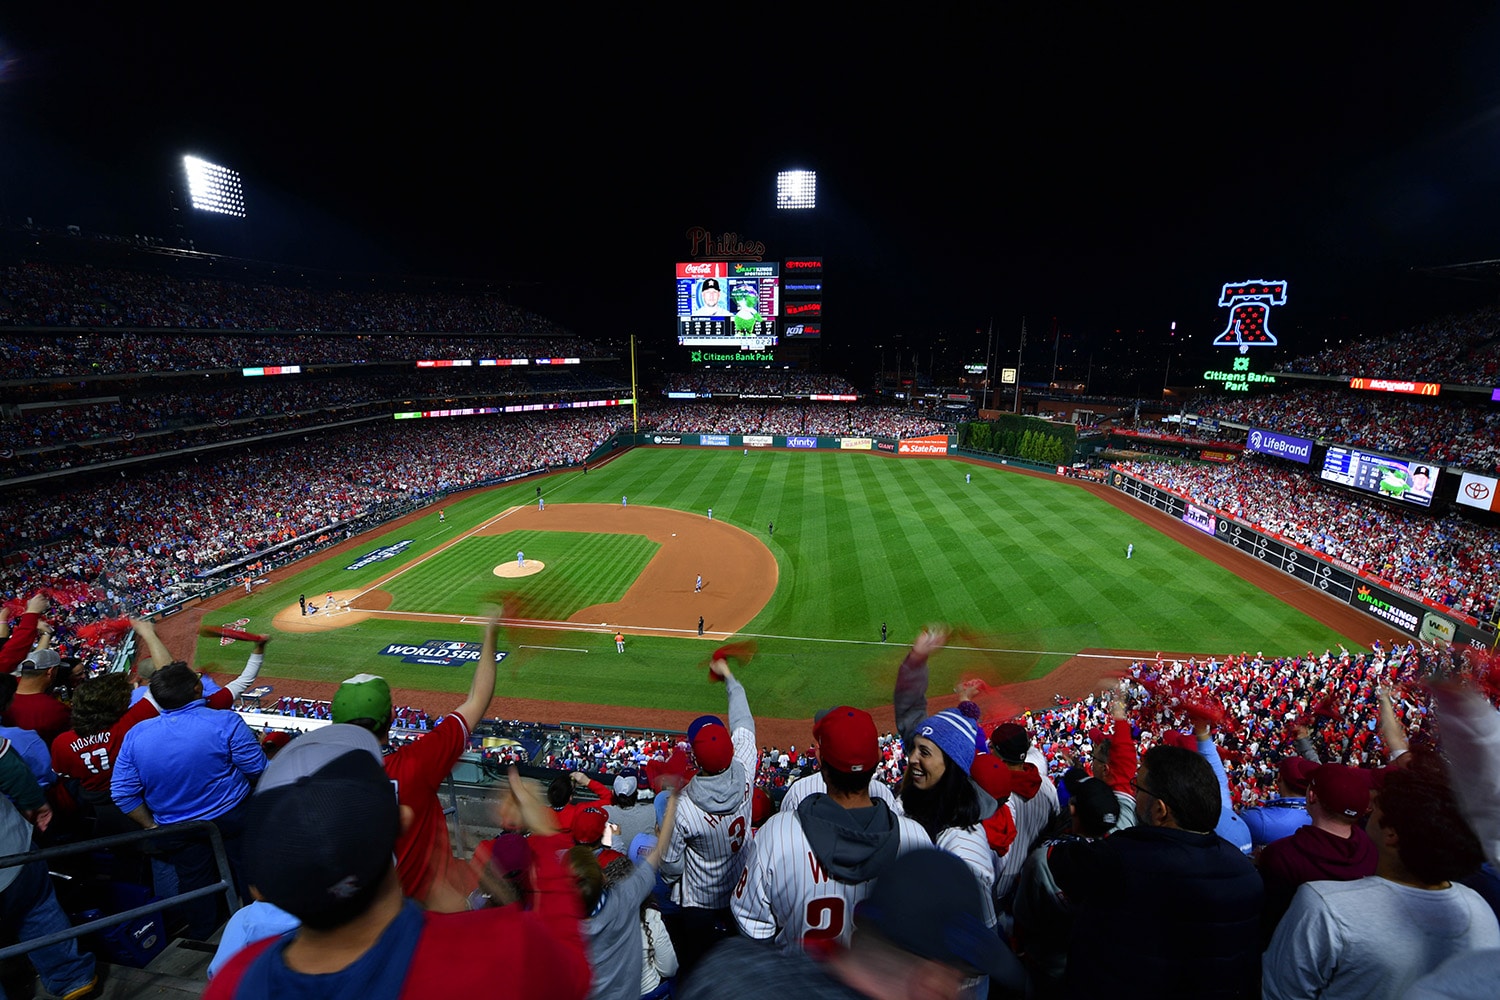 Fans cheer on the Philadelphia Phillies during a World Series game against the Houston Astros